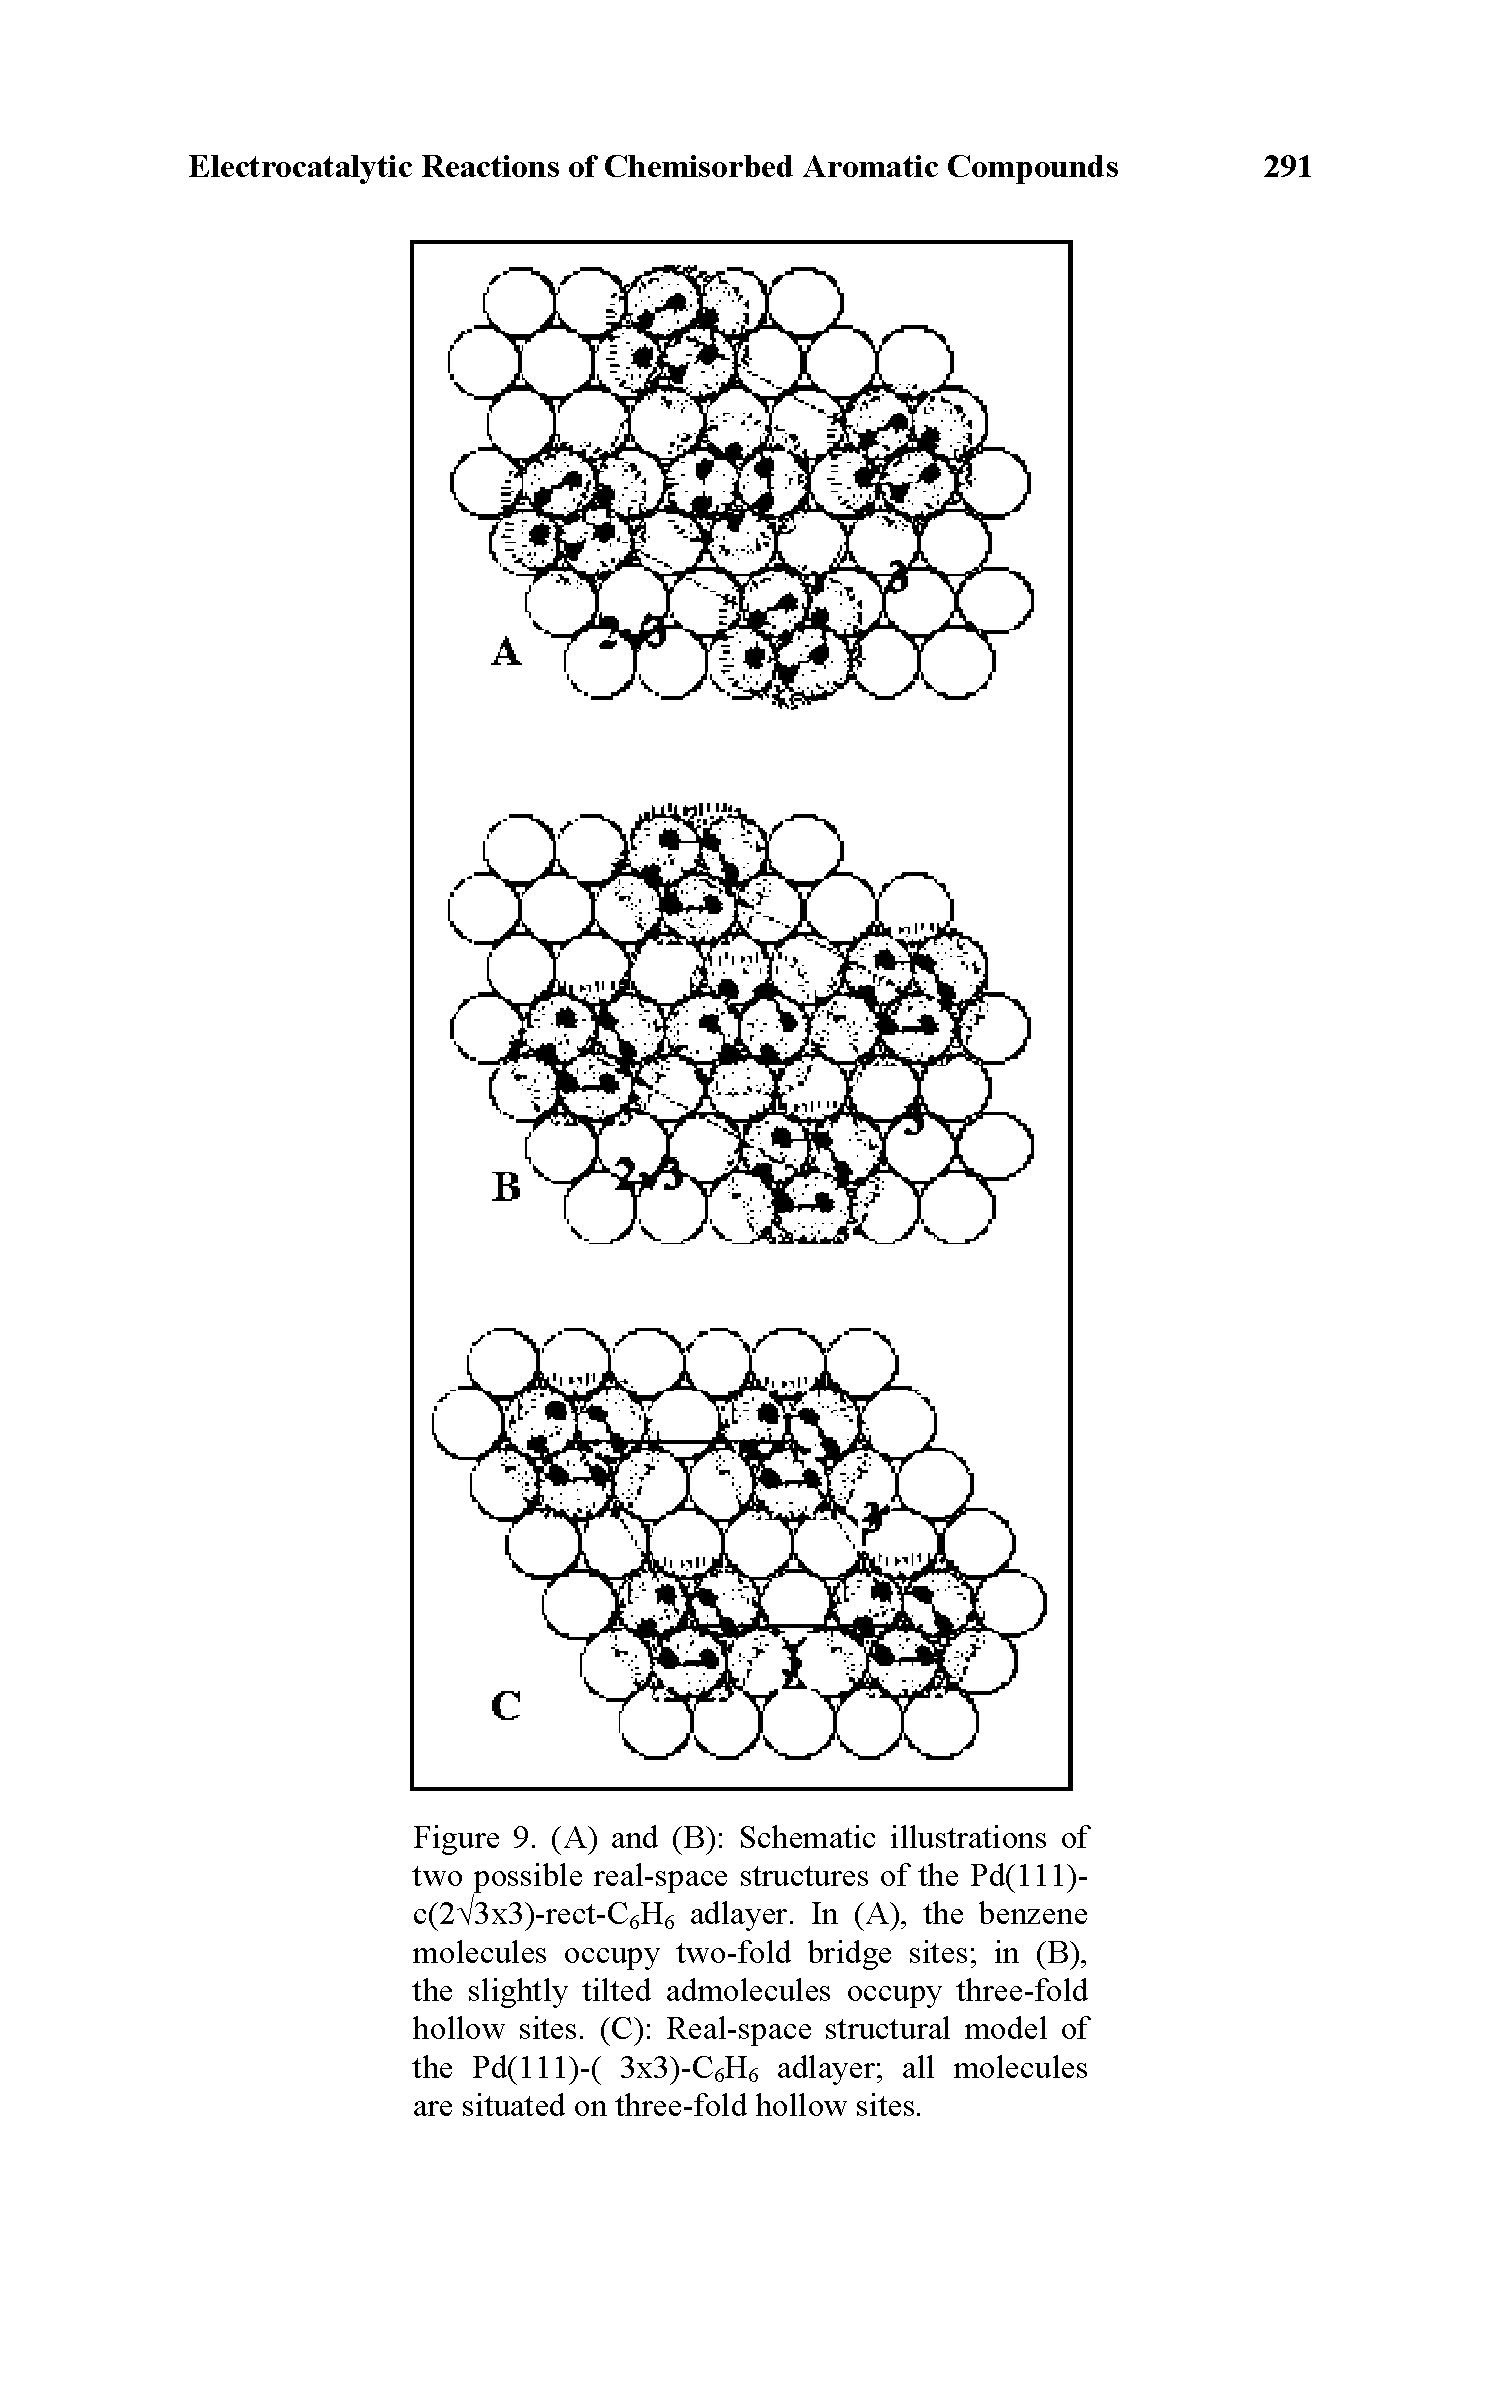 Figure 9. (A) and (B) Schematic illustrations of two possible real-space structures of the Pd(lll)-c(2V3x3)-rect-C6H6 adlayer. In (A), the benzene molecules occupy two-fold bridge sites in (B), the slightly tilted admolecules occupy three-fold hollow sites. (C) Real-space structural model of the Pd(lll)-( 3x3)-C6H6 adlayer all molecules are situated on three-fold hollow sites.